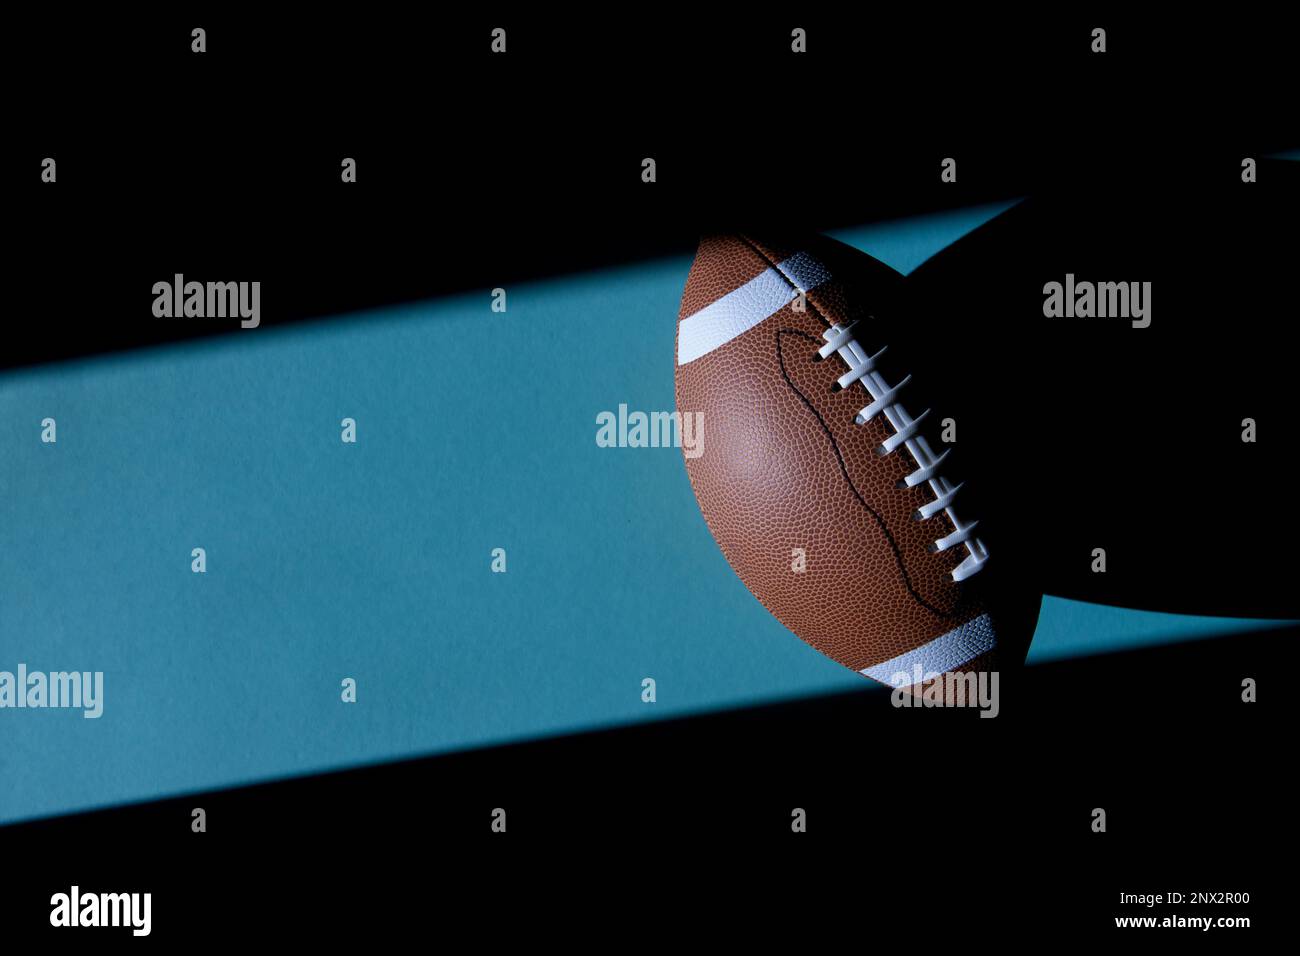 American football leather ball on blue background. Top view. Game equipment horizontal sport theme poster, greeting cards, headers, website and app Stock Photo